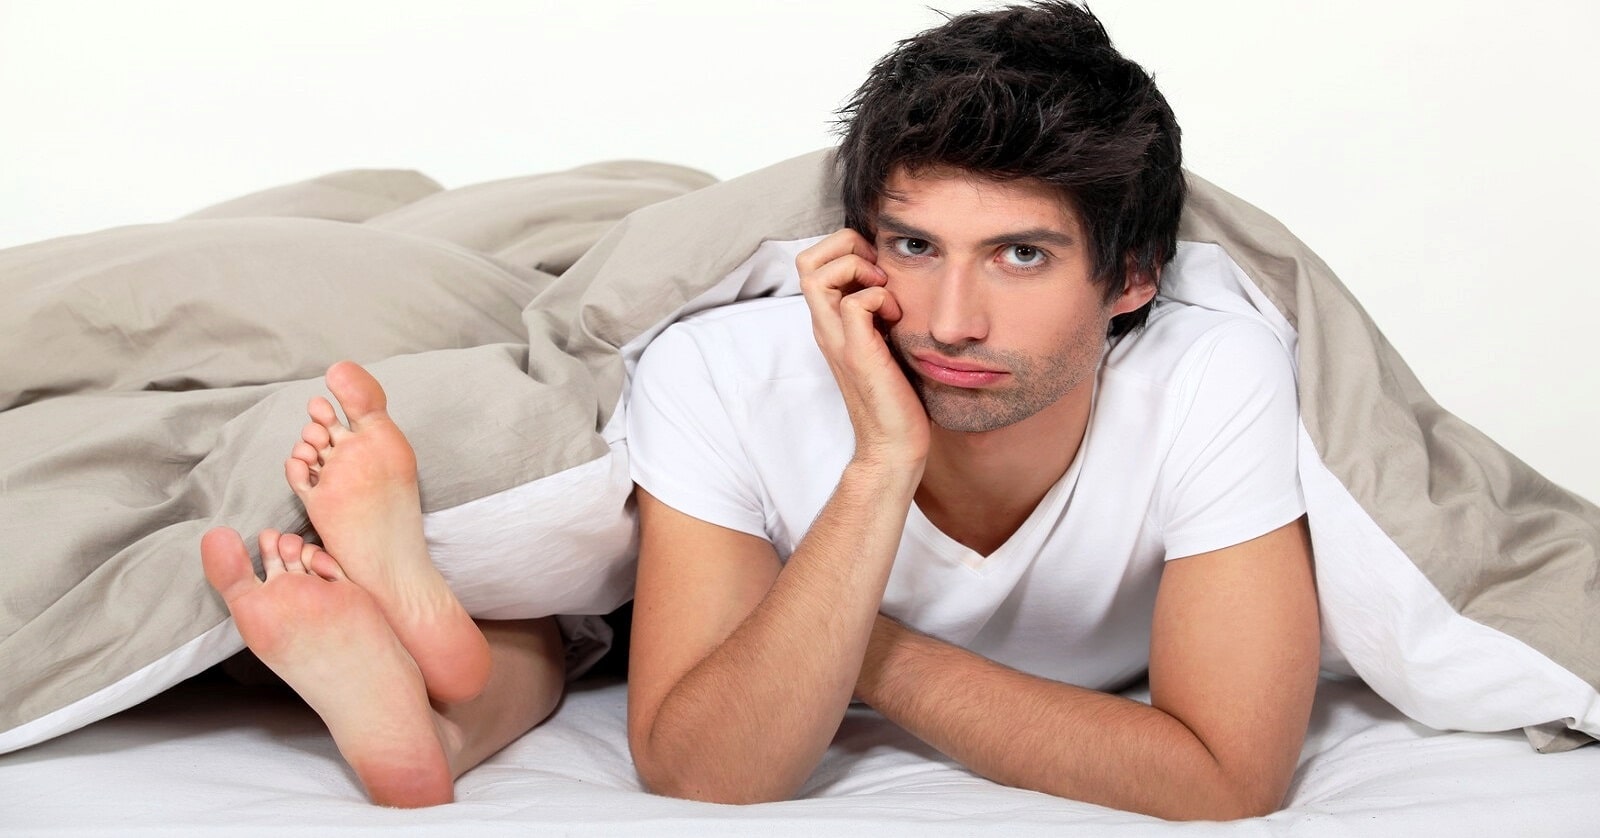 man looking bored in bed and showing signs of sexual frustration